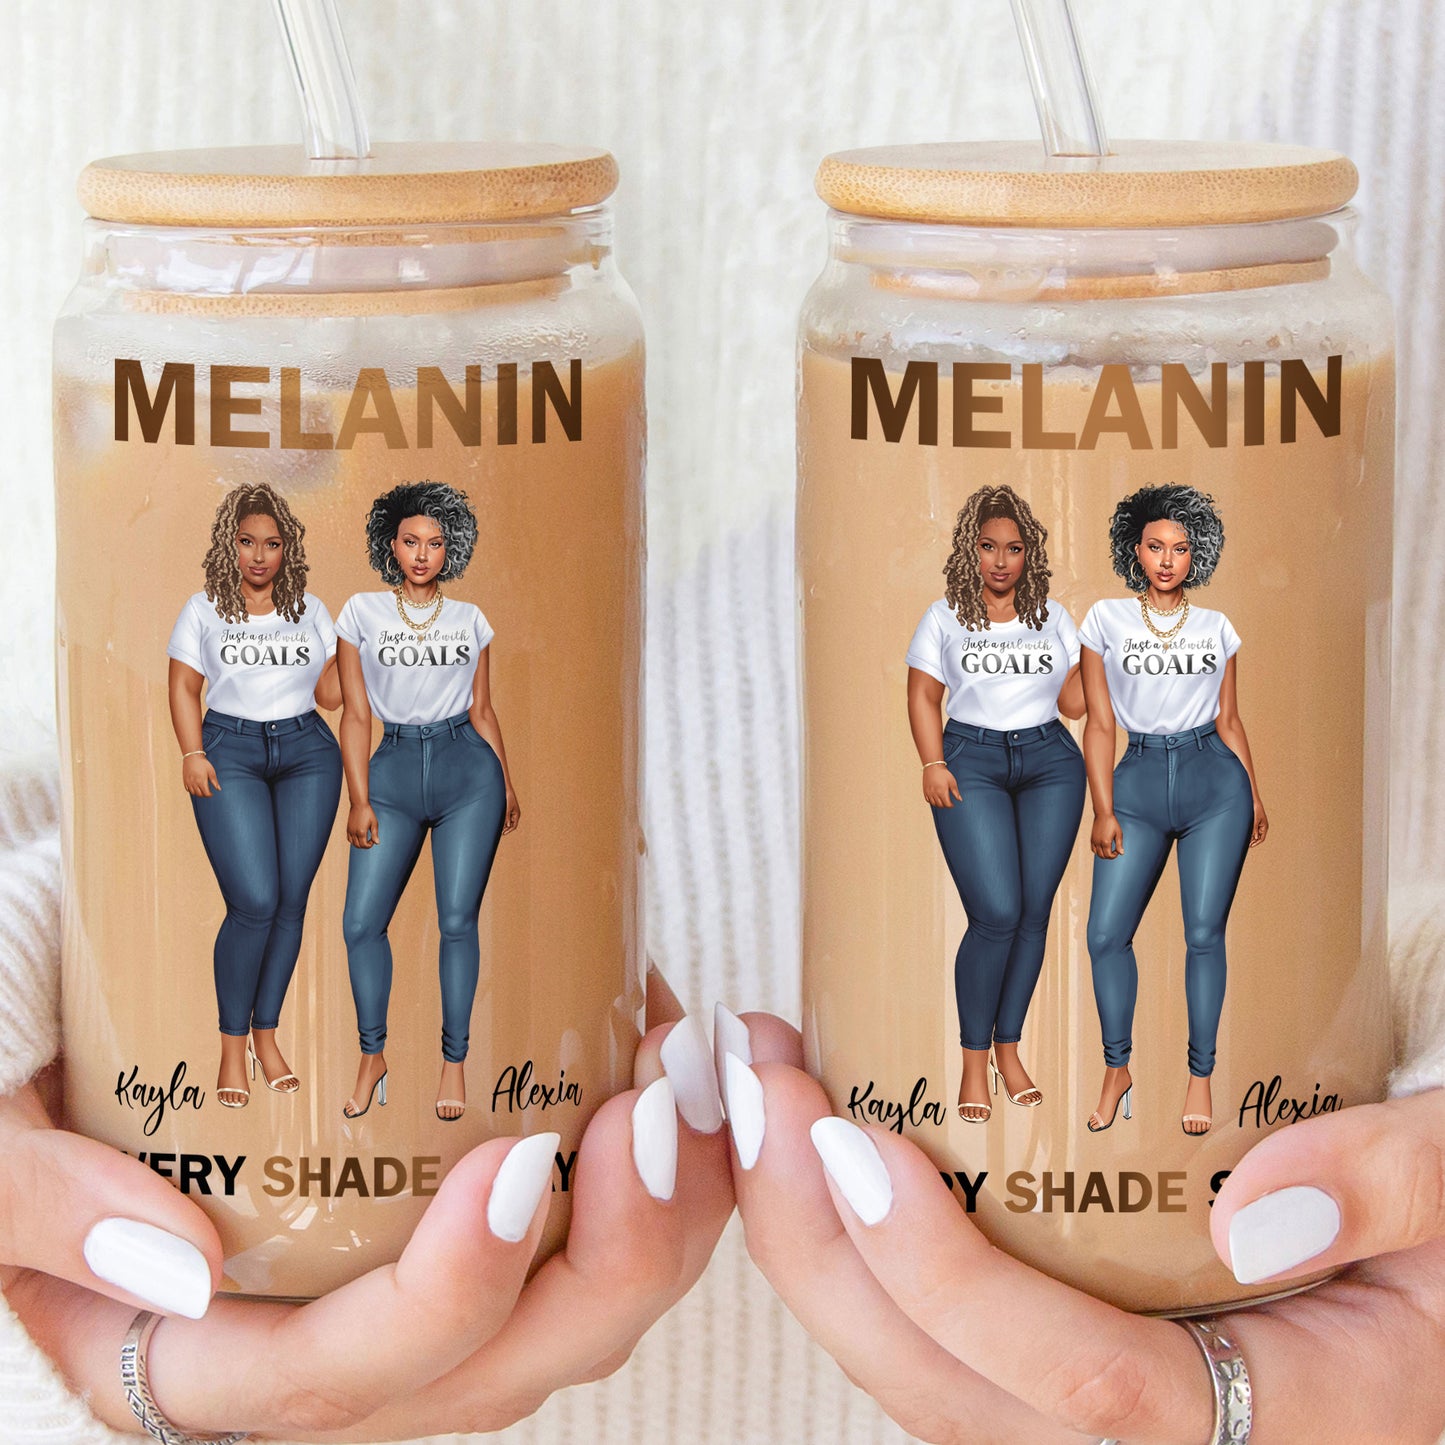 Melanin Every Shade Slays Sistas Friend Gift - Personalized Clear Glass Cup